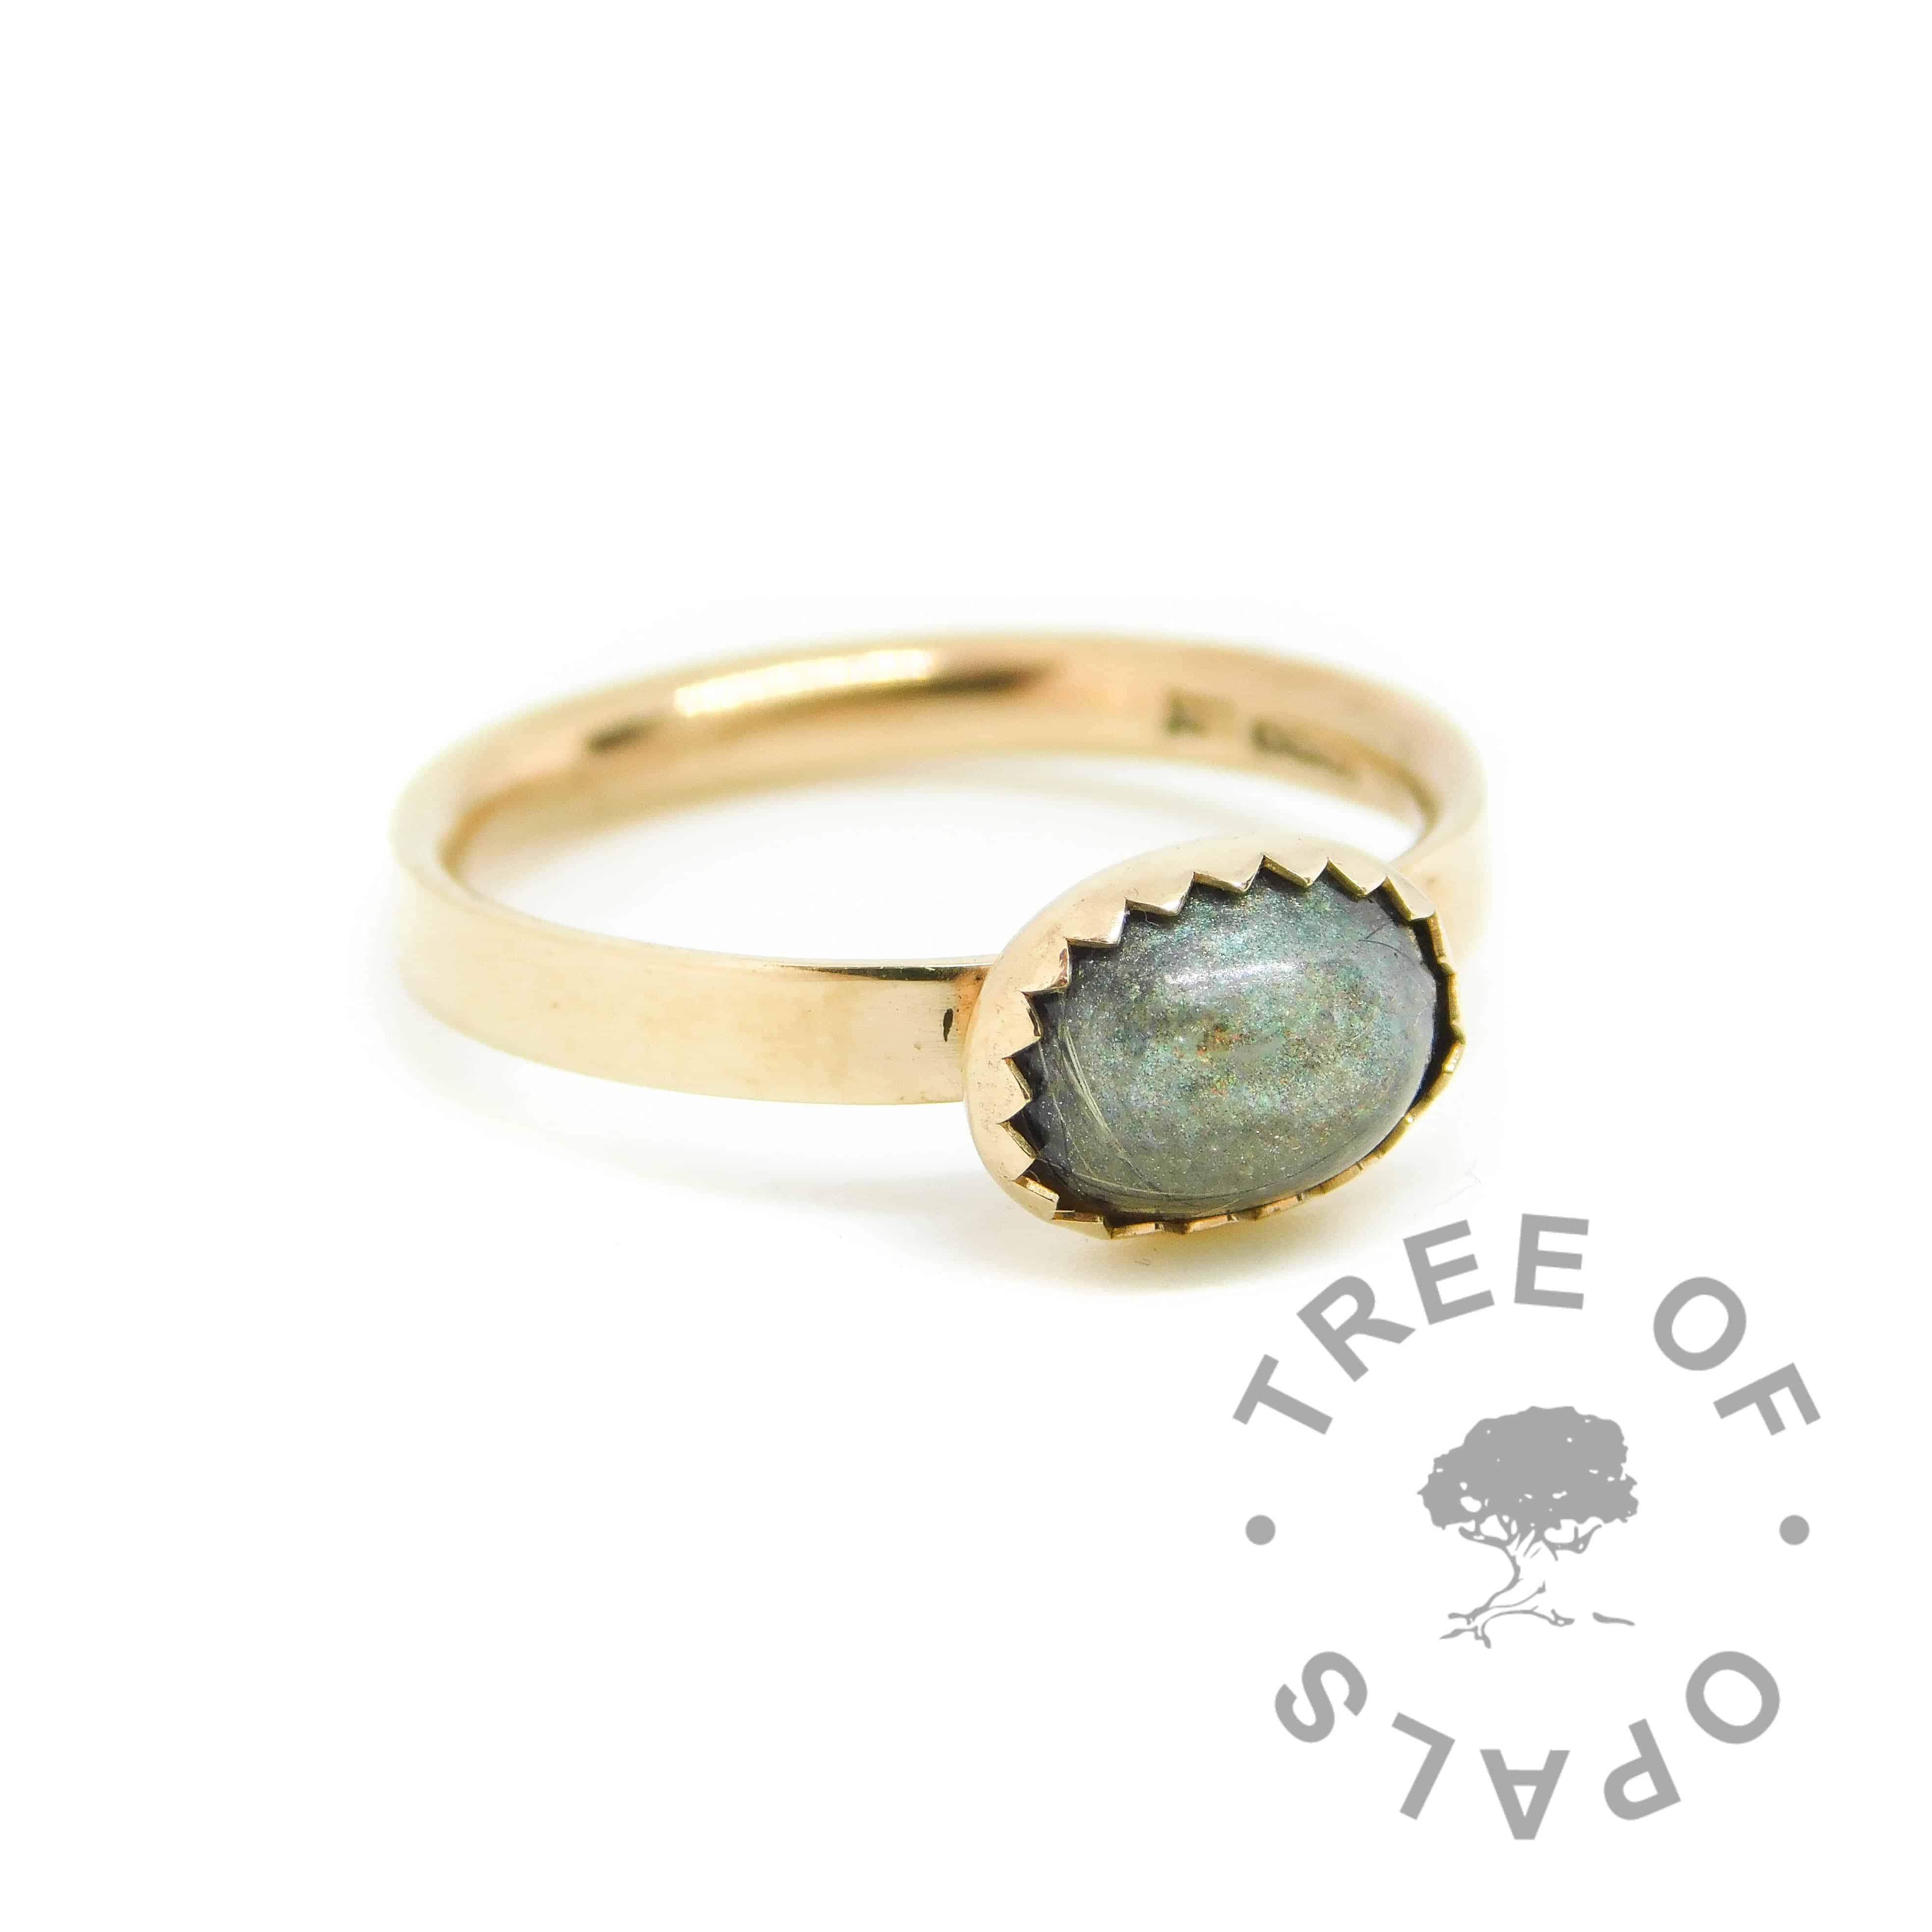 14ct gold fur ring with mermaid teal resin sparkle mix, no birthstone. Brushed ring band handformed with solid 14ct gold, and 8x6mm serrated bezel cup. Hallmarked with Tree of Opals maker's mark at The Birmingham Assay Office. Watermarked copyright Tree of Opals memorial jewellery image